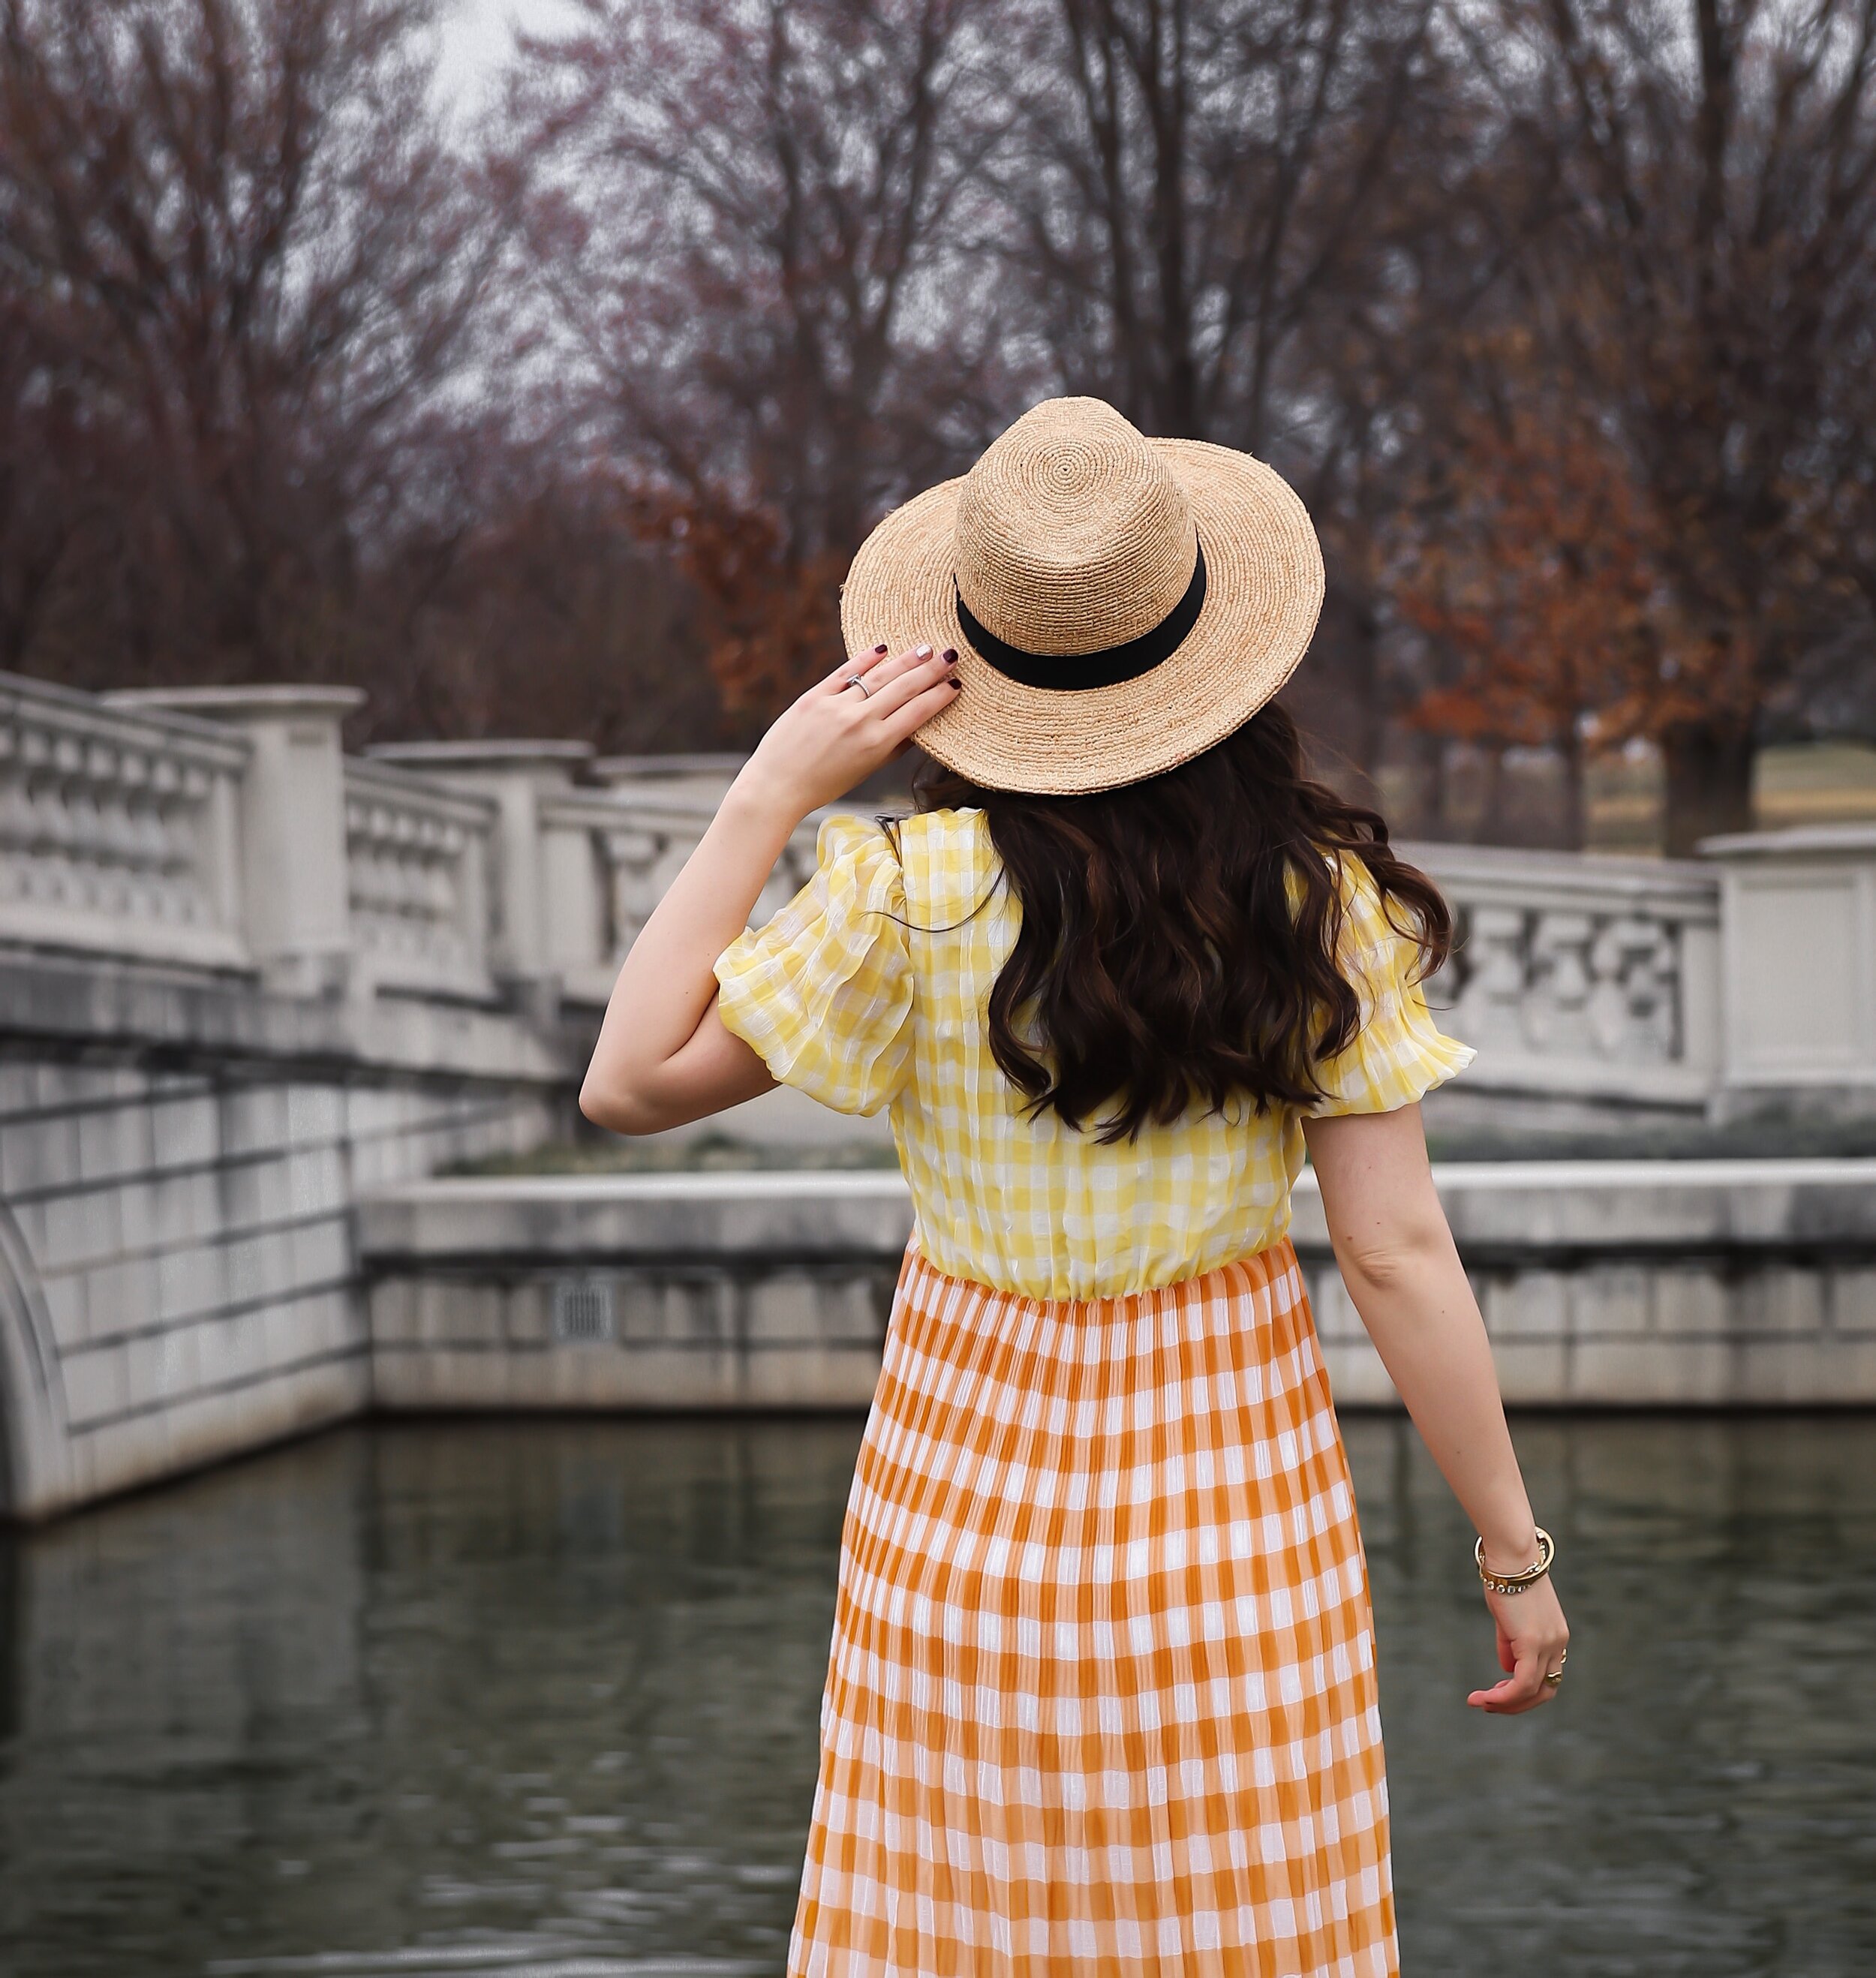 Gingham Midi Dress Summer Picnic Esther Santer NYC Street Style Fashion Blogger Fedora Checkered Maxi Orange Yellow Colorful Spring Stawberries Photoshoot St Louis Missouri Foxiedox Noa Initital Necklace Gold Bracelets Rings Jewelry Forest Park Hat.jpg